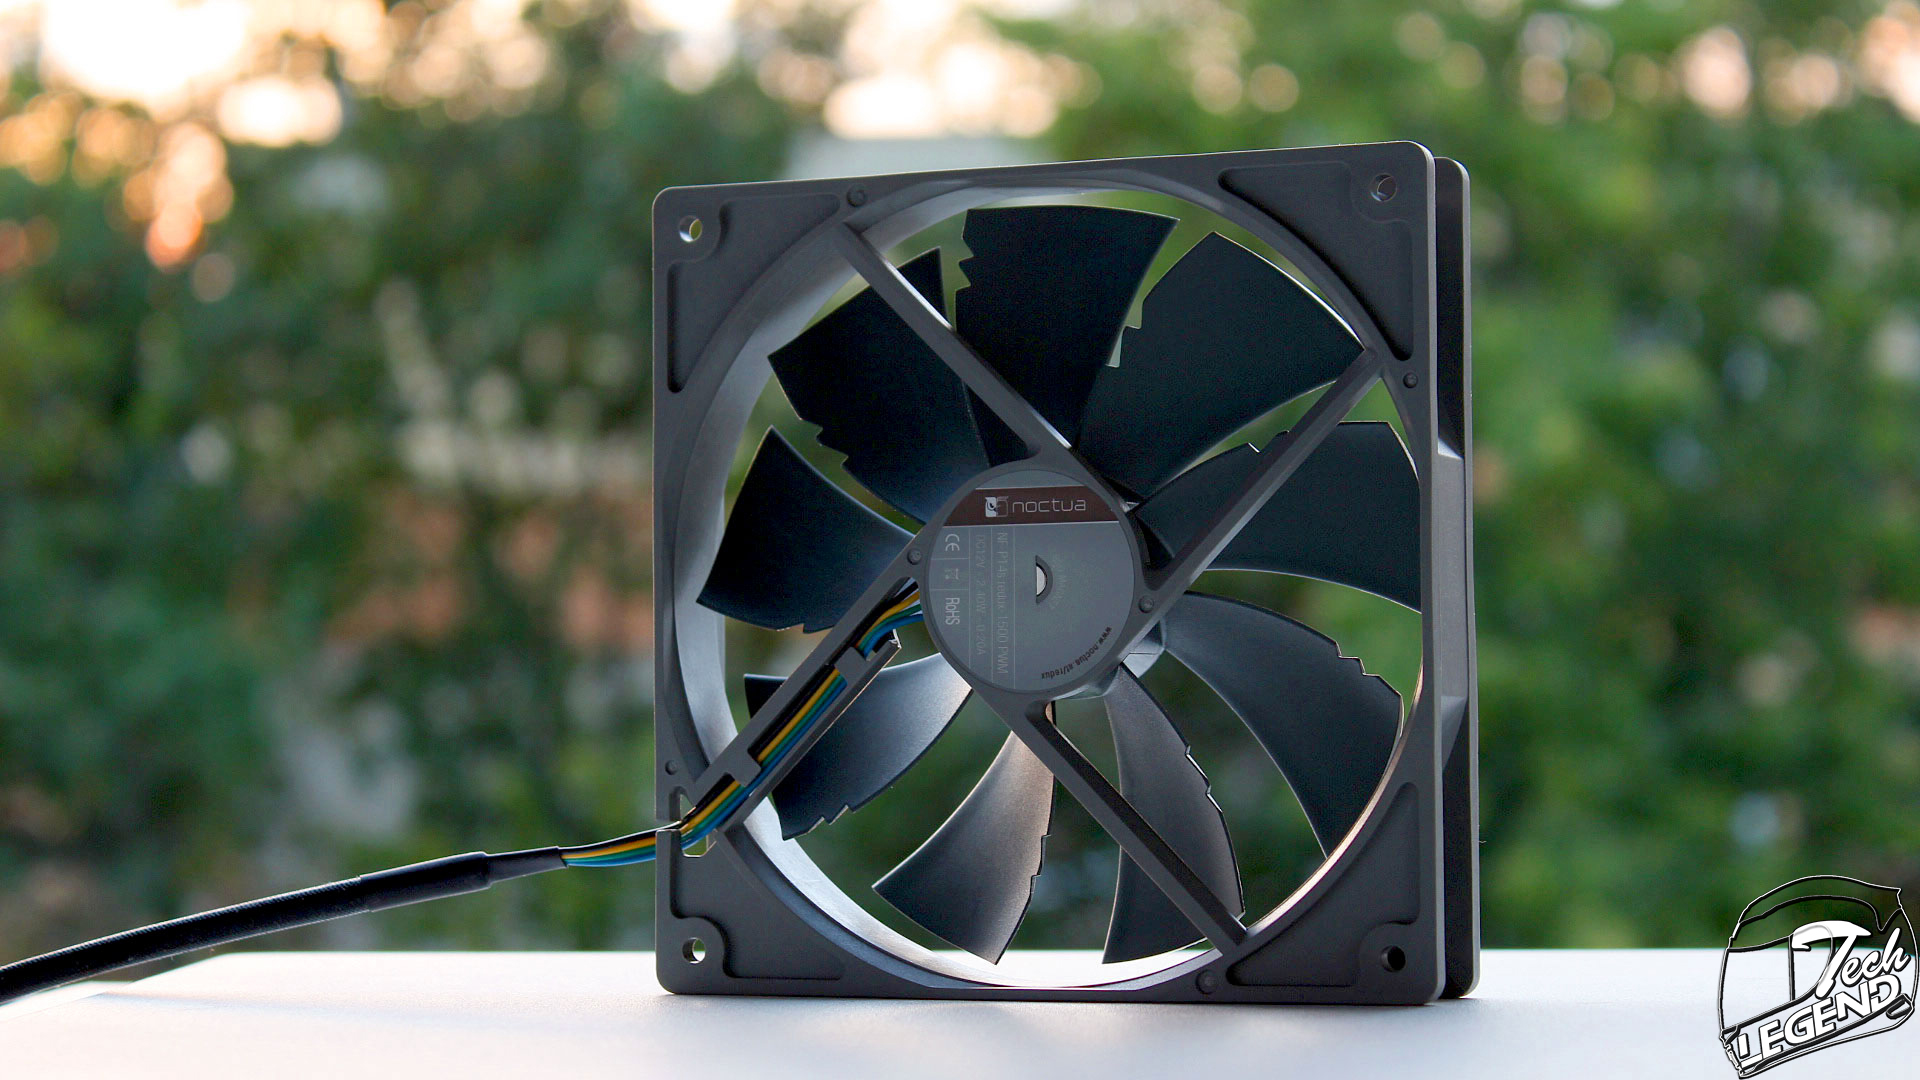 High Performance Cooling Fan with 1500RPM 4-Pin 140mm, round, Grey Noctua NF-P14r redux-1500 PWM